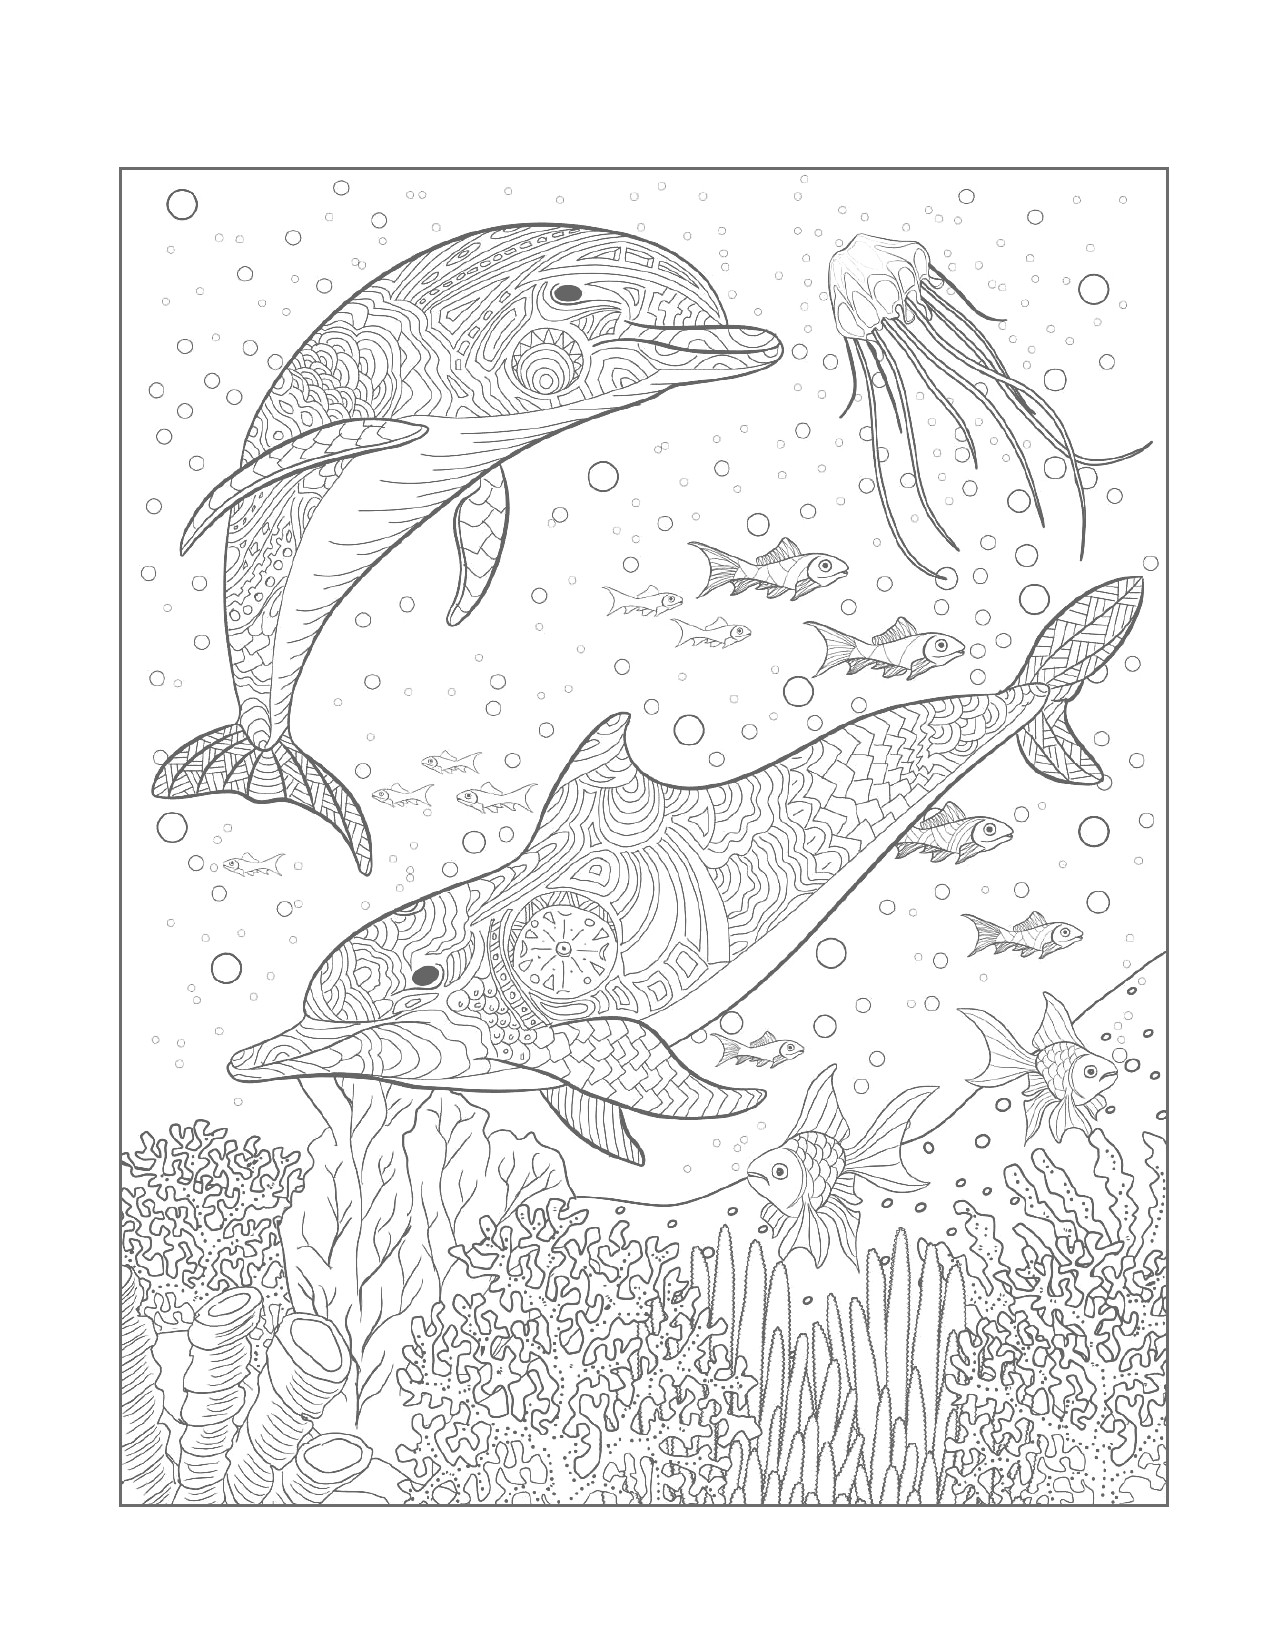 Ocean Dolphins Coloring Page For Adults